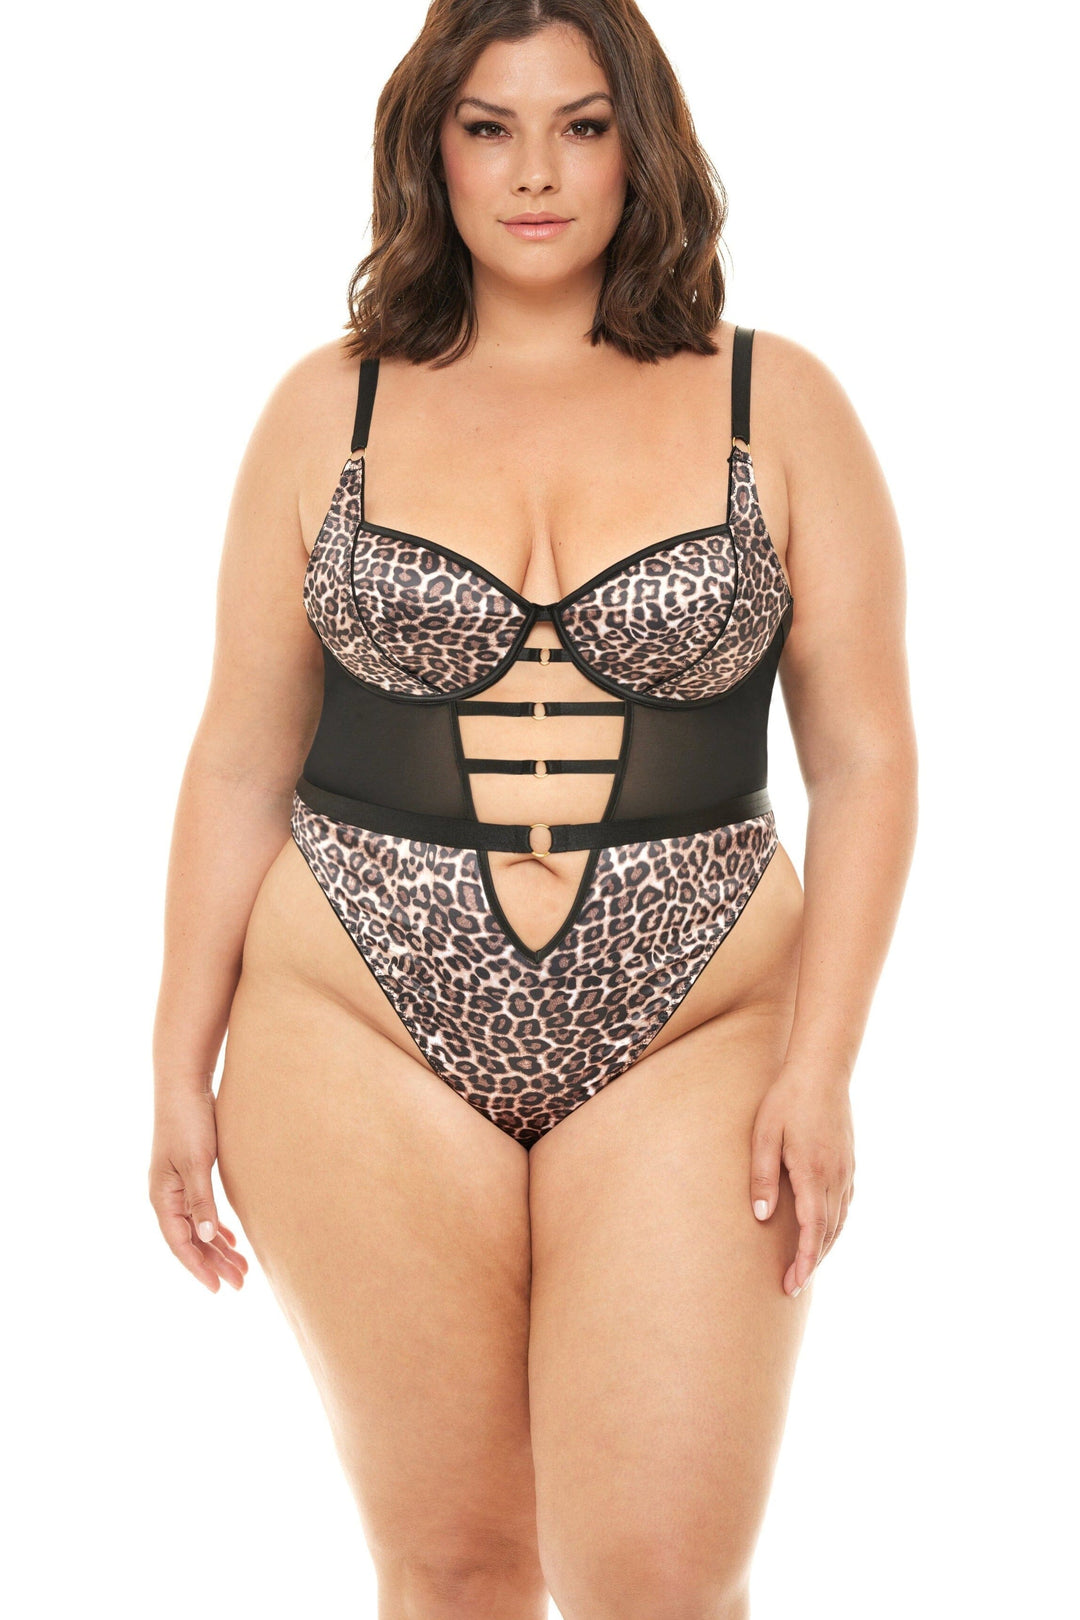 Mold Cup Underwire Teddy With Leopard Print Satin And Mesh Paneling-Teddies-Oh La La Cheri-Animal-2XL-SEXYSHOES.COM